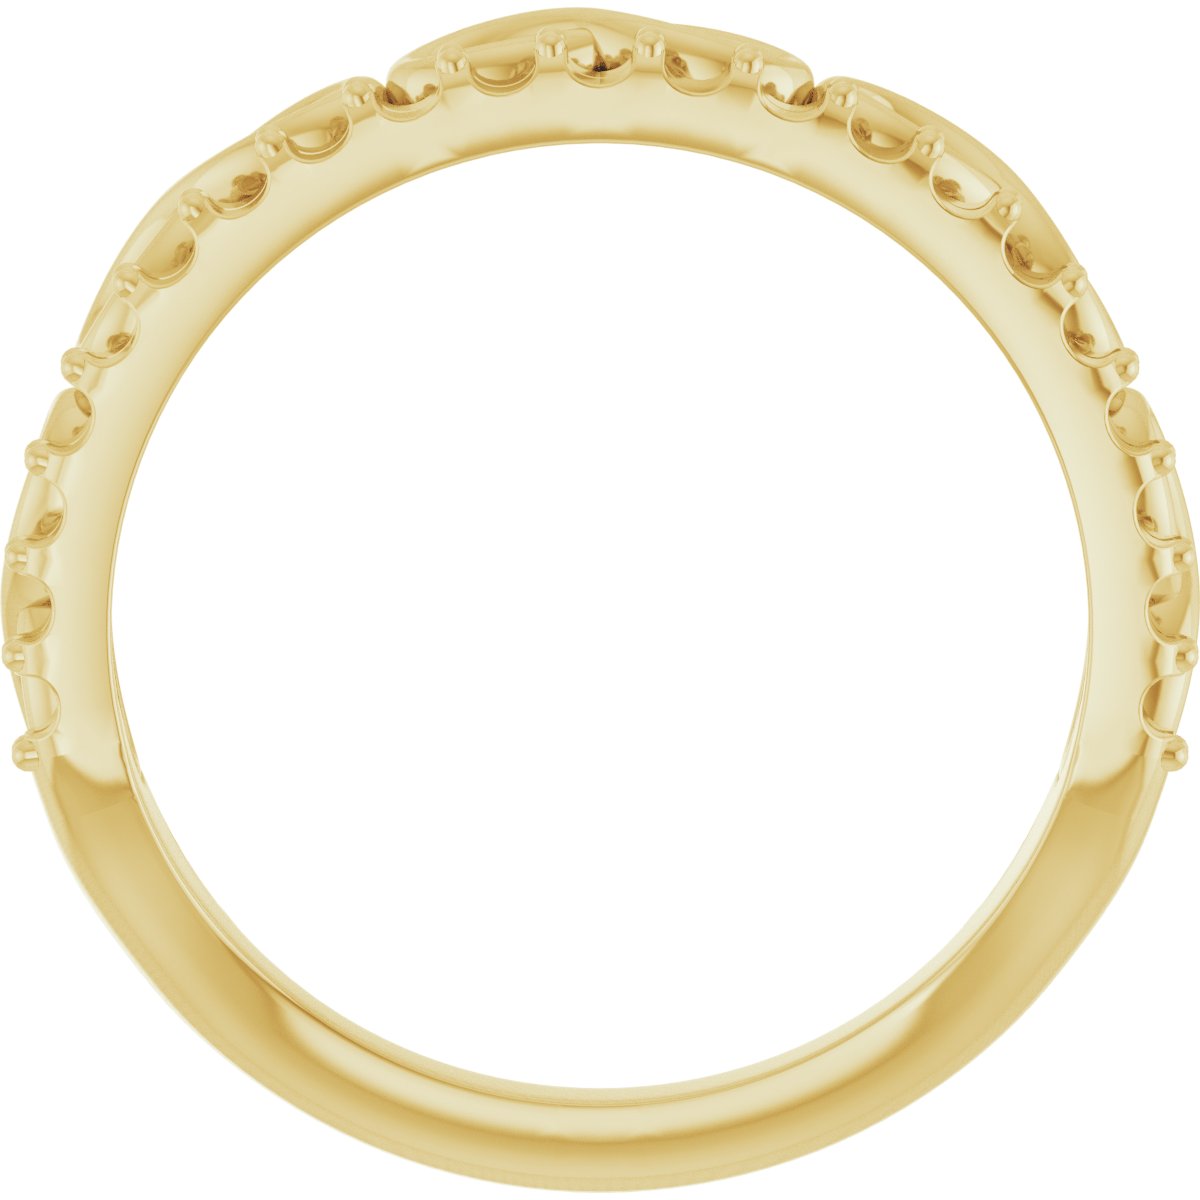 14K Yellow 1/4 CTW Diamond Infinity-Inspired Stackable Ring